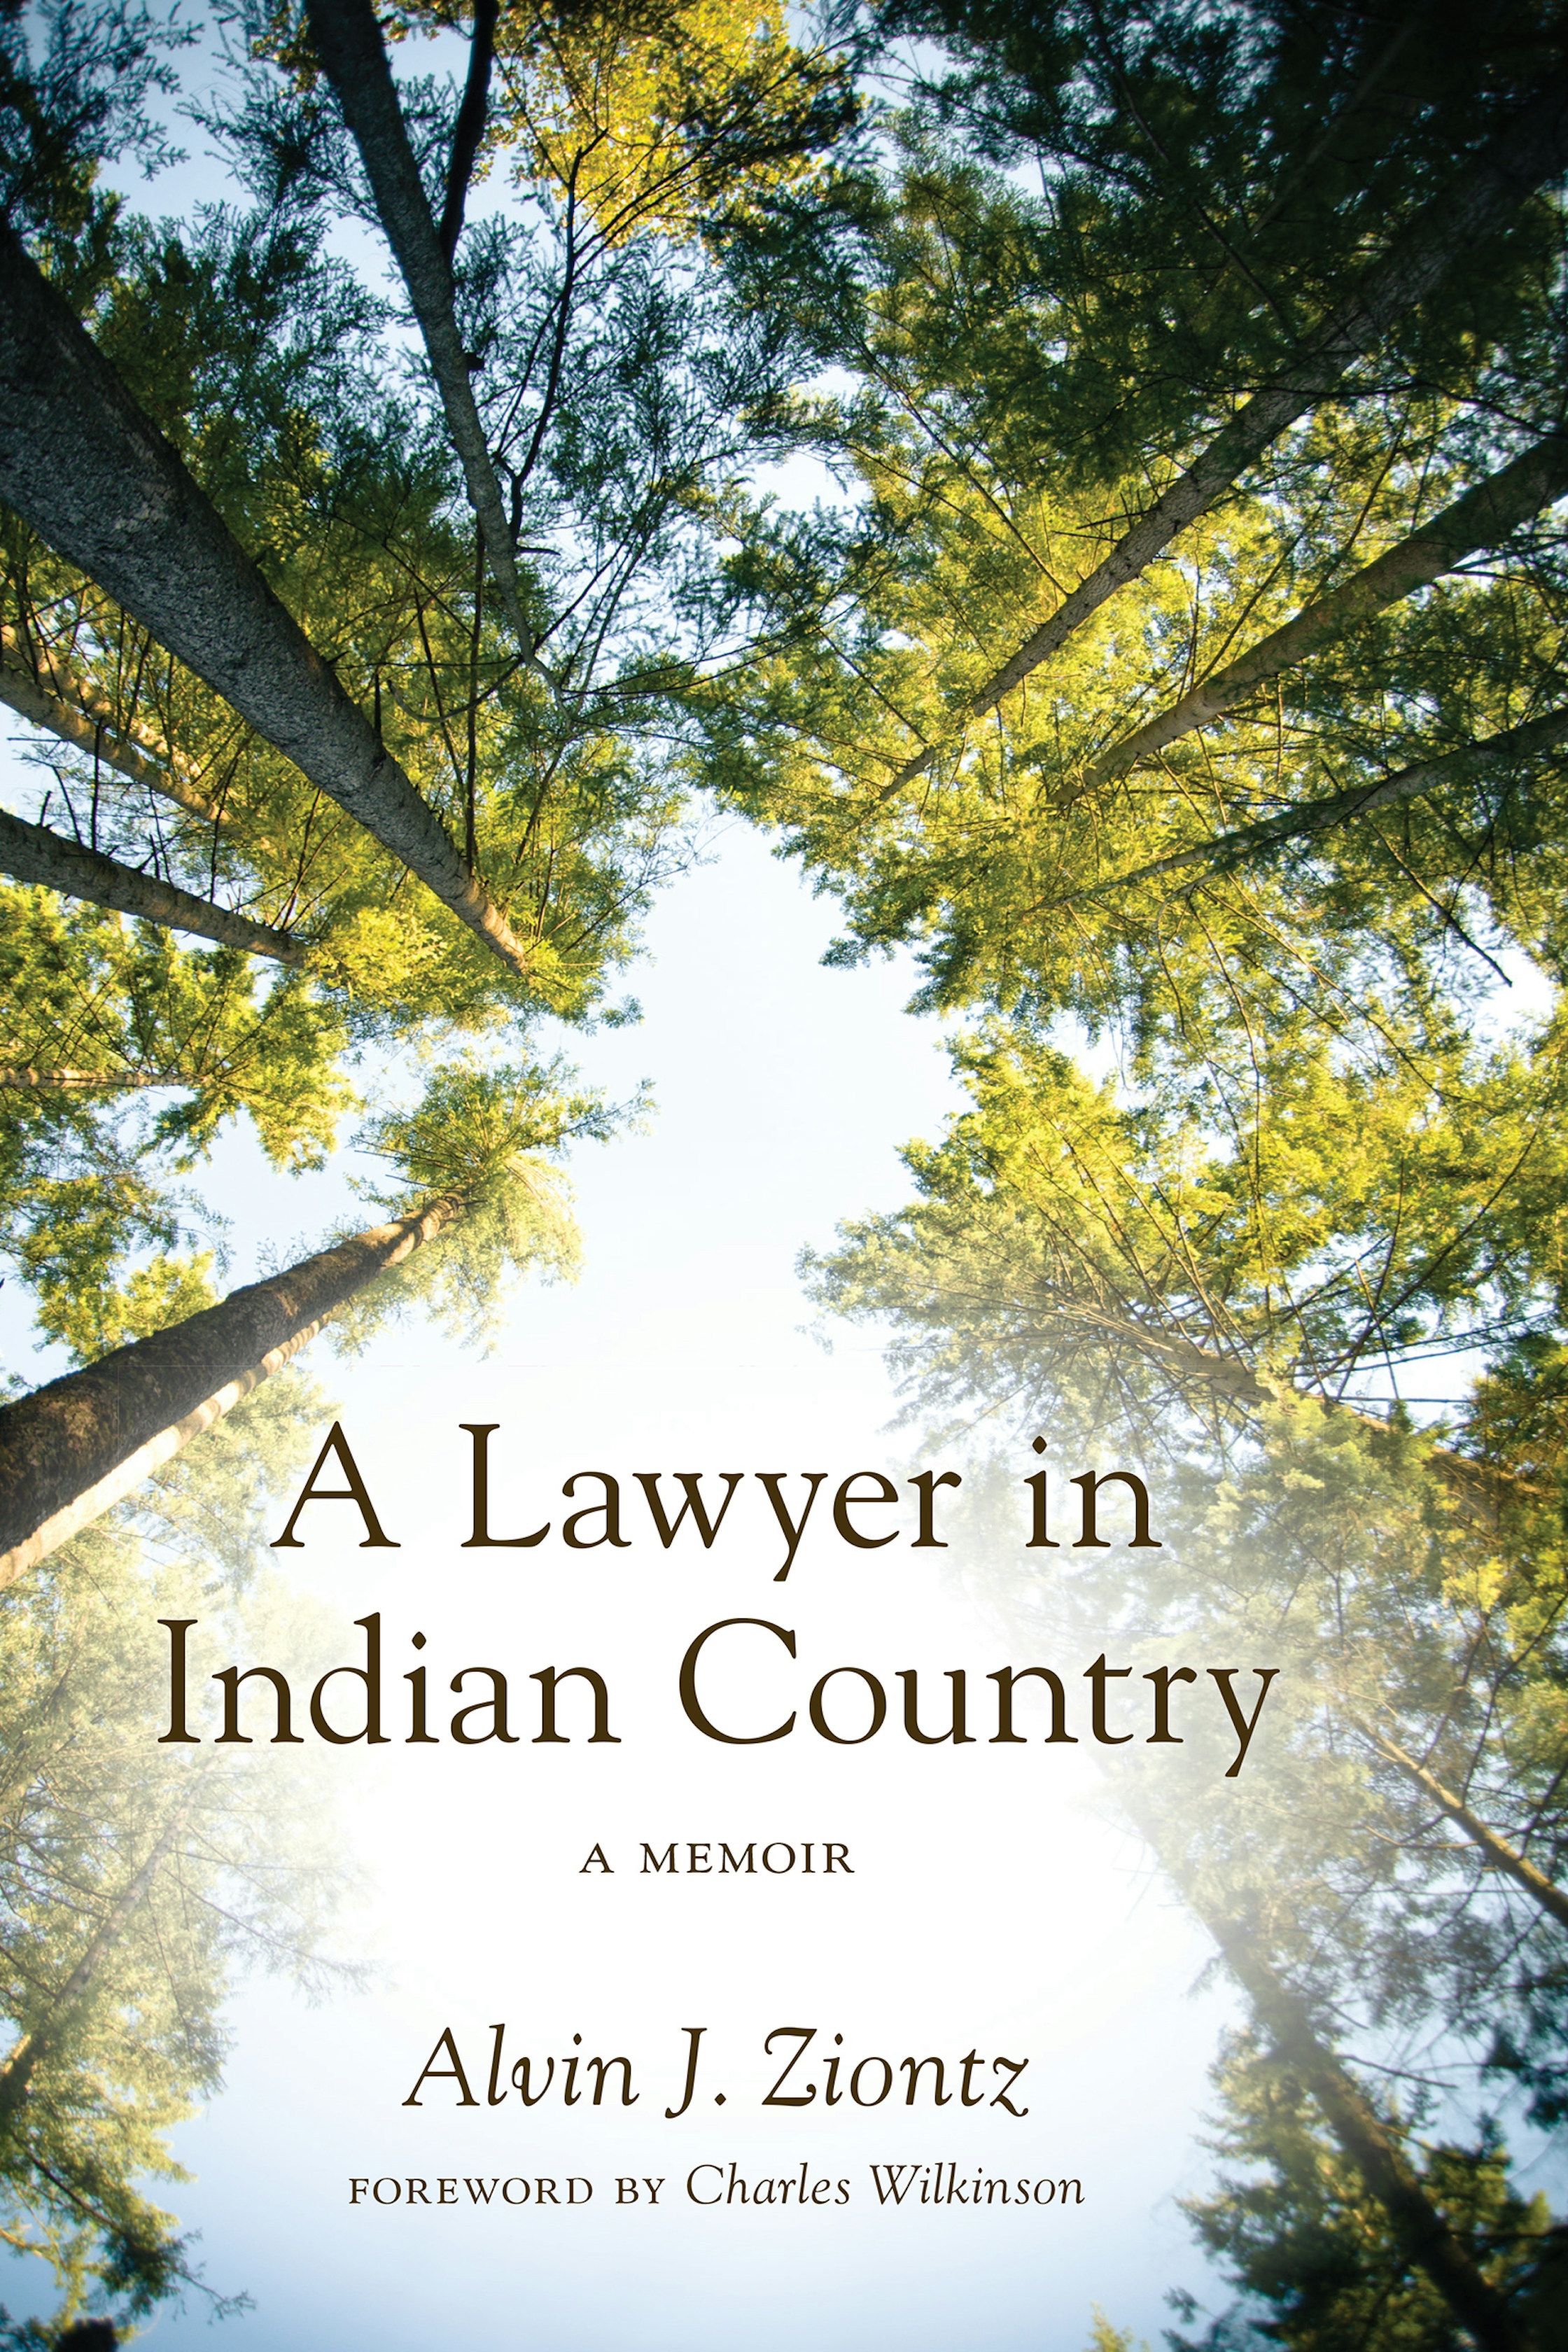 A Lawyer in Indian Country